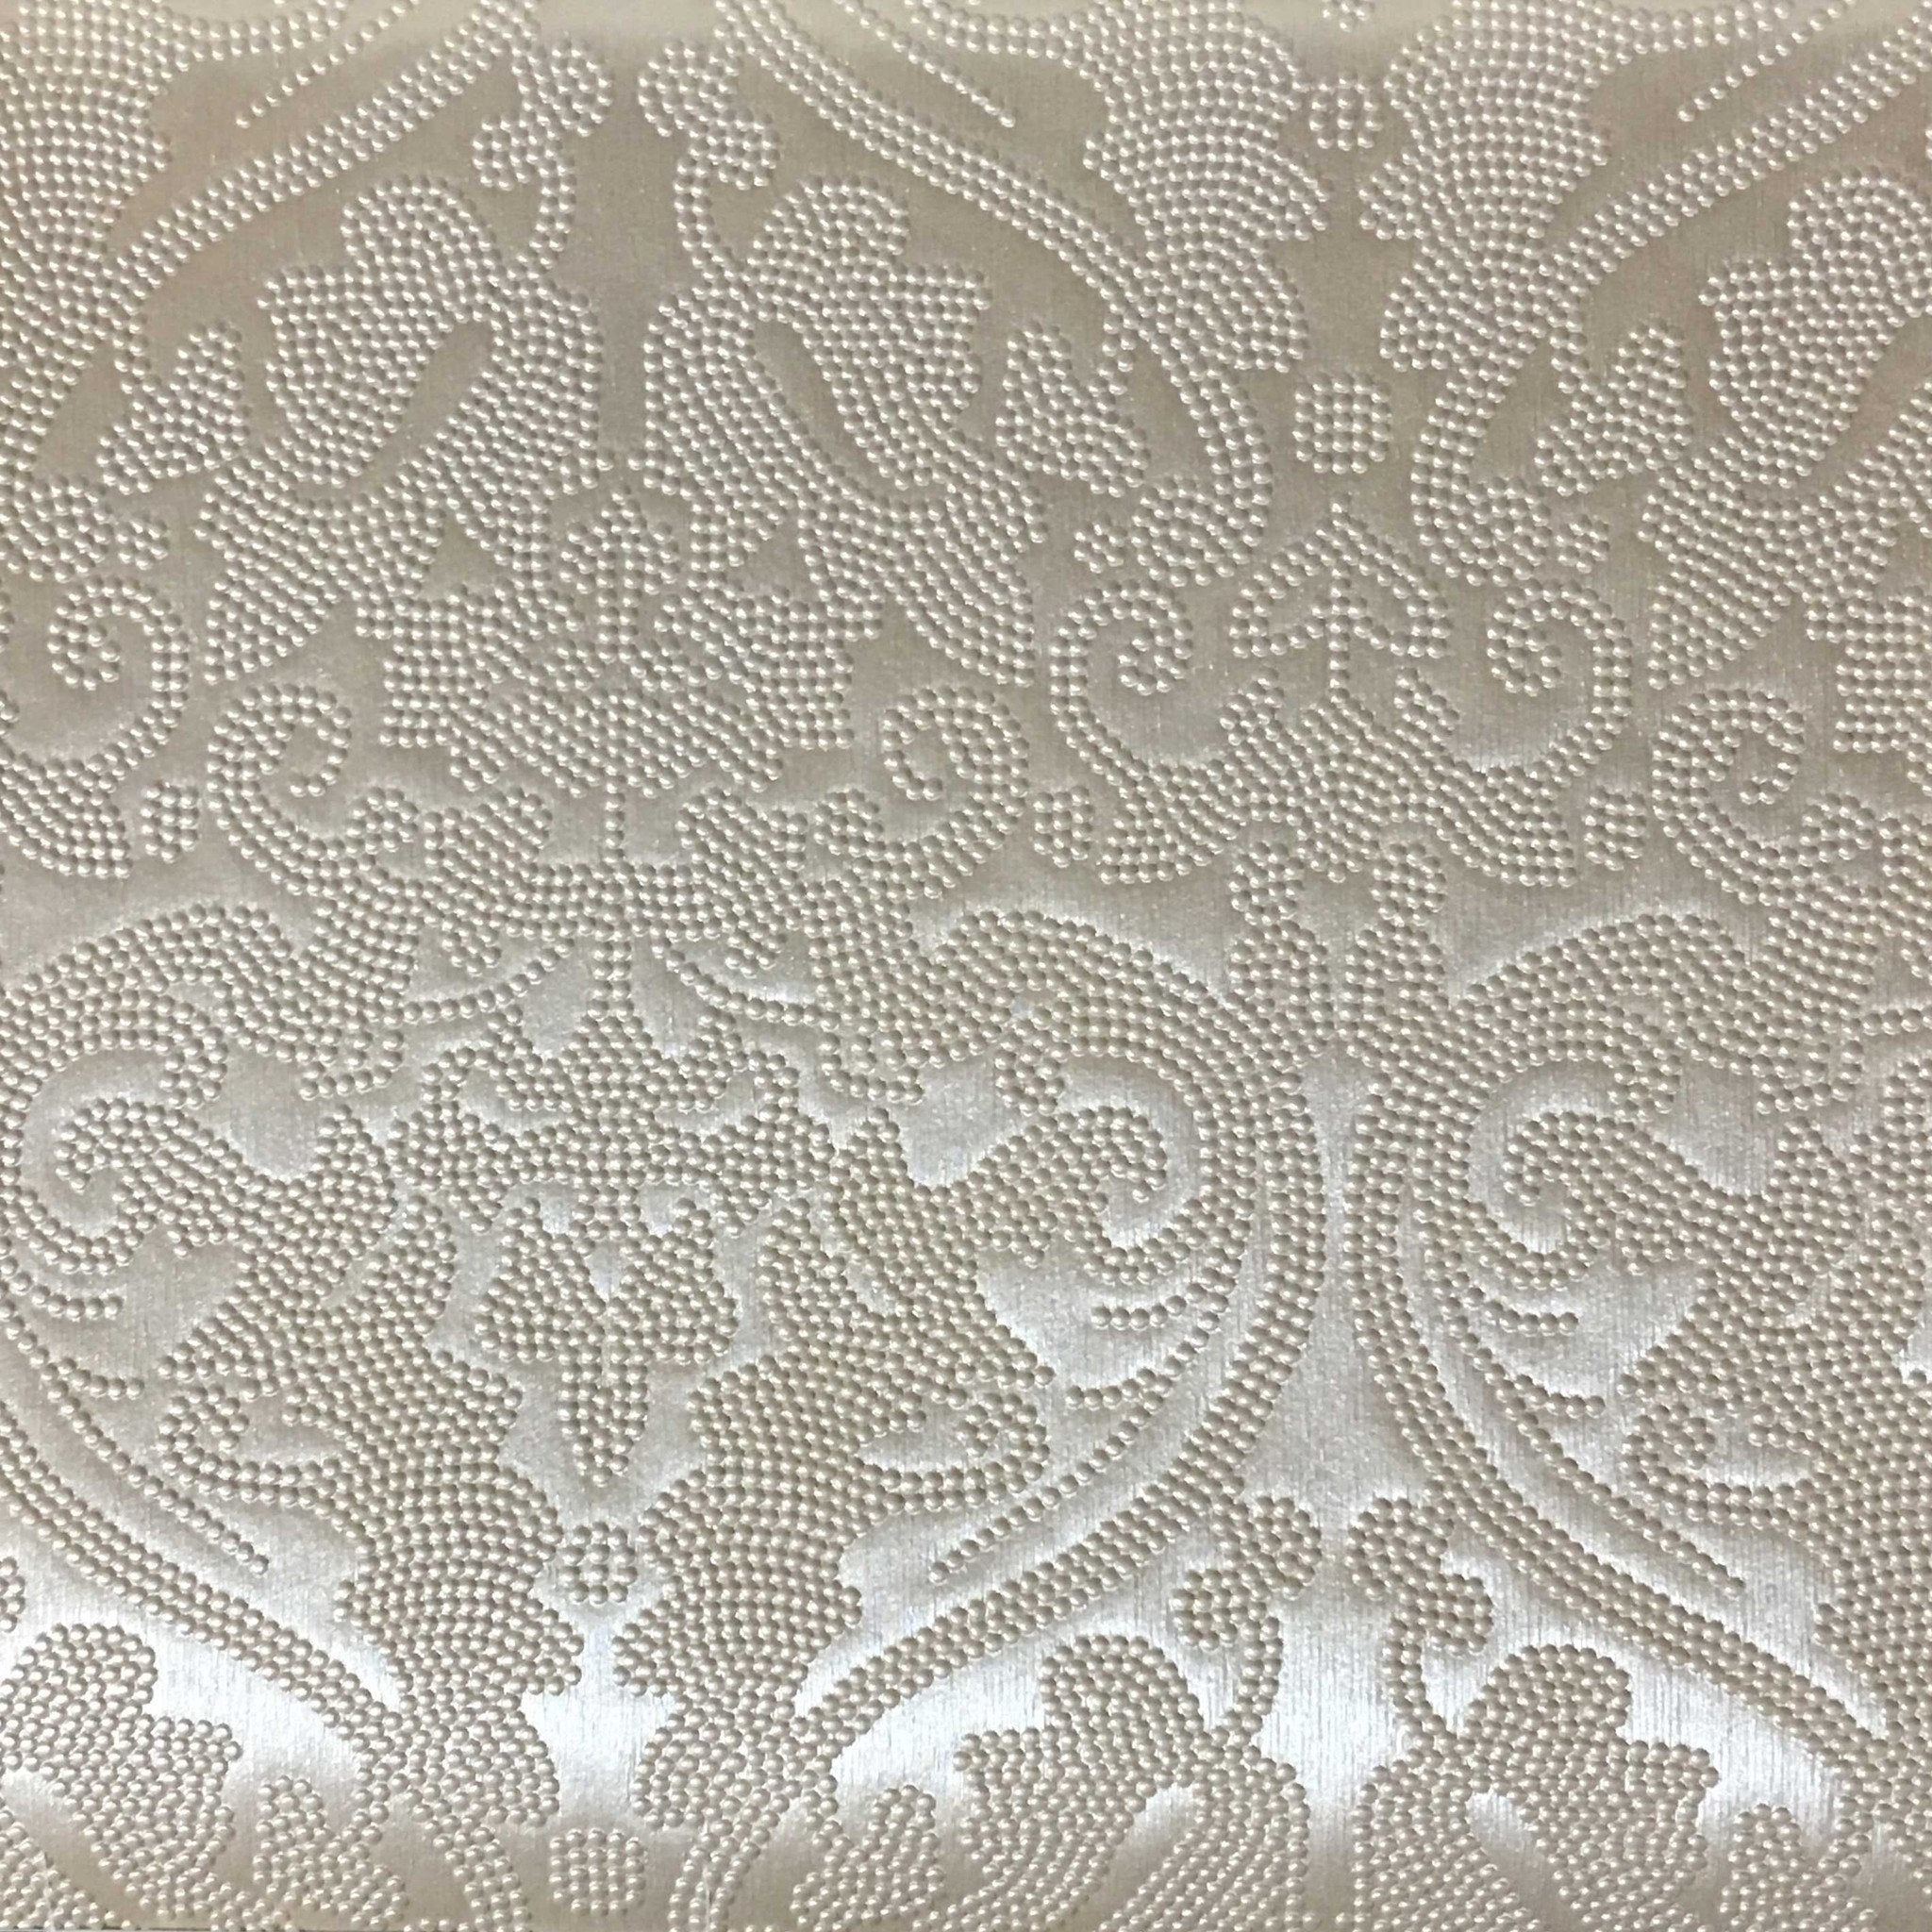 PARISIAN - EMBOSSED DAMASK PATTERN VINYL UPHOLSTERY FABRIC BY THE YARD